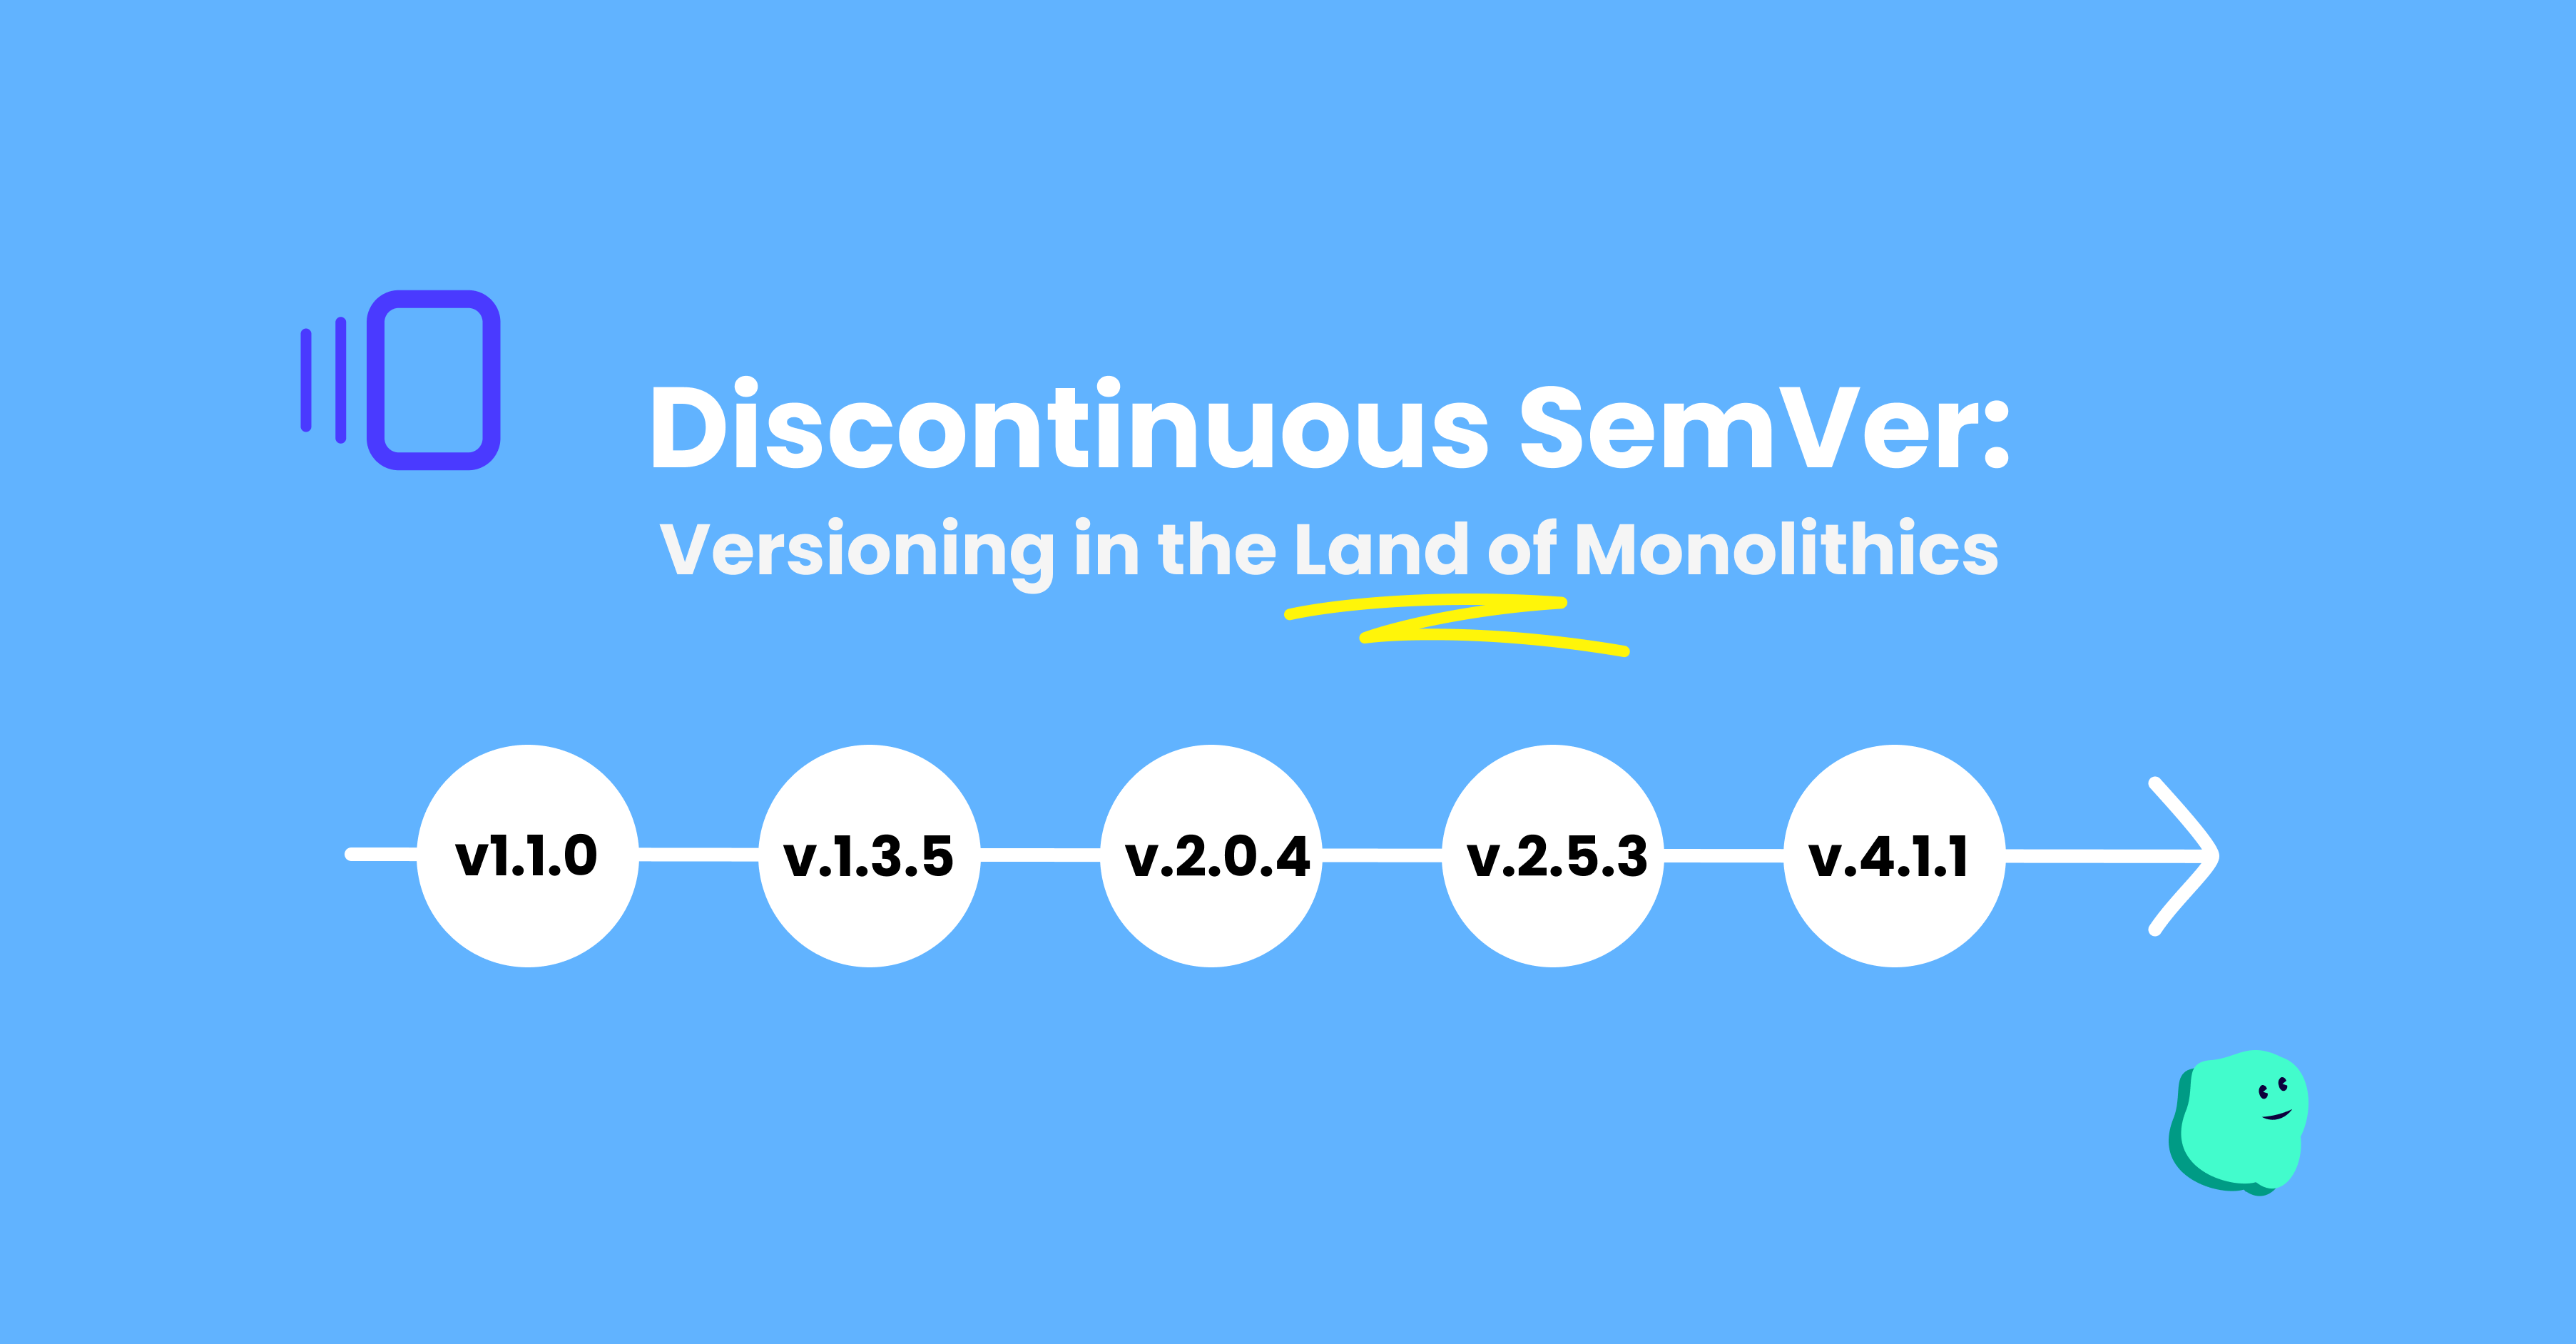 Discontinuous Semver: Versioning in the Land of Monolithics